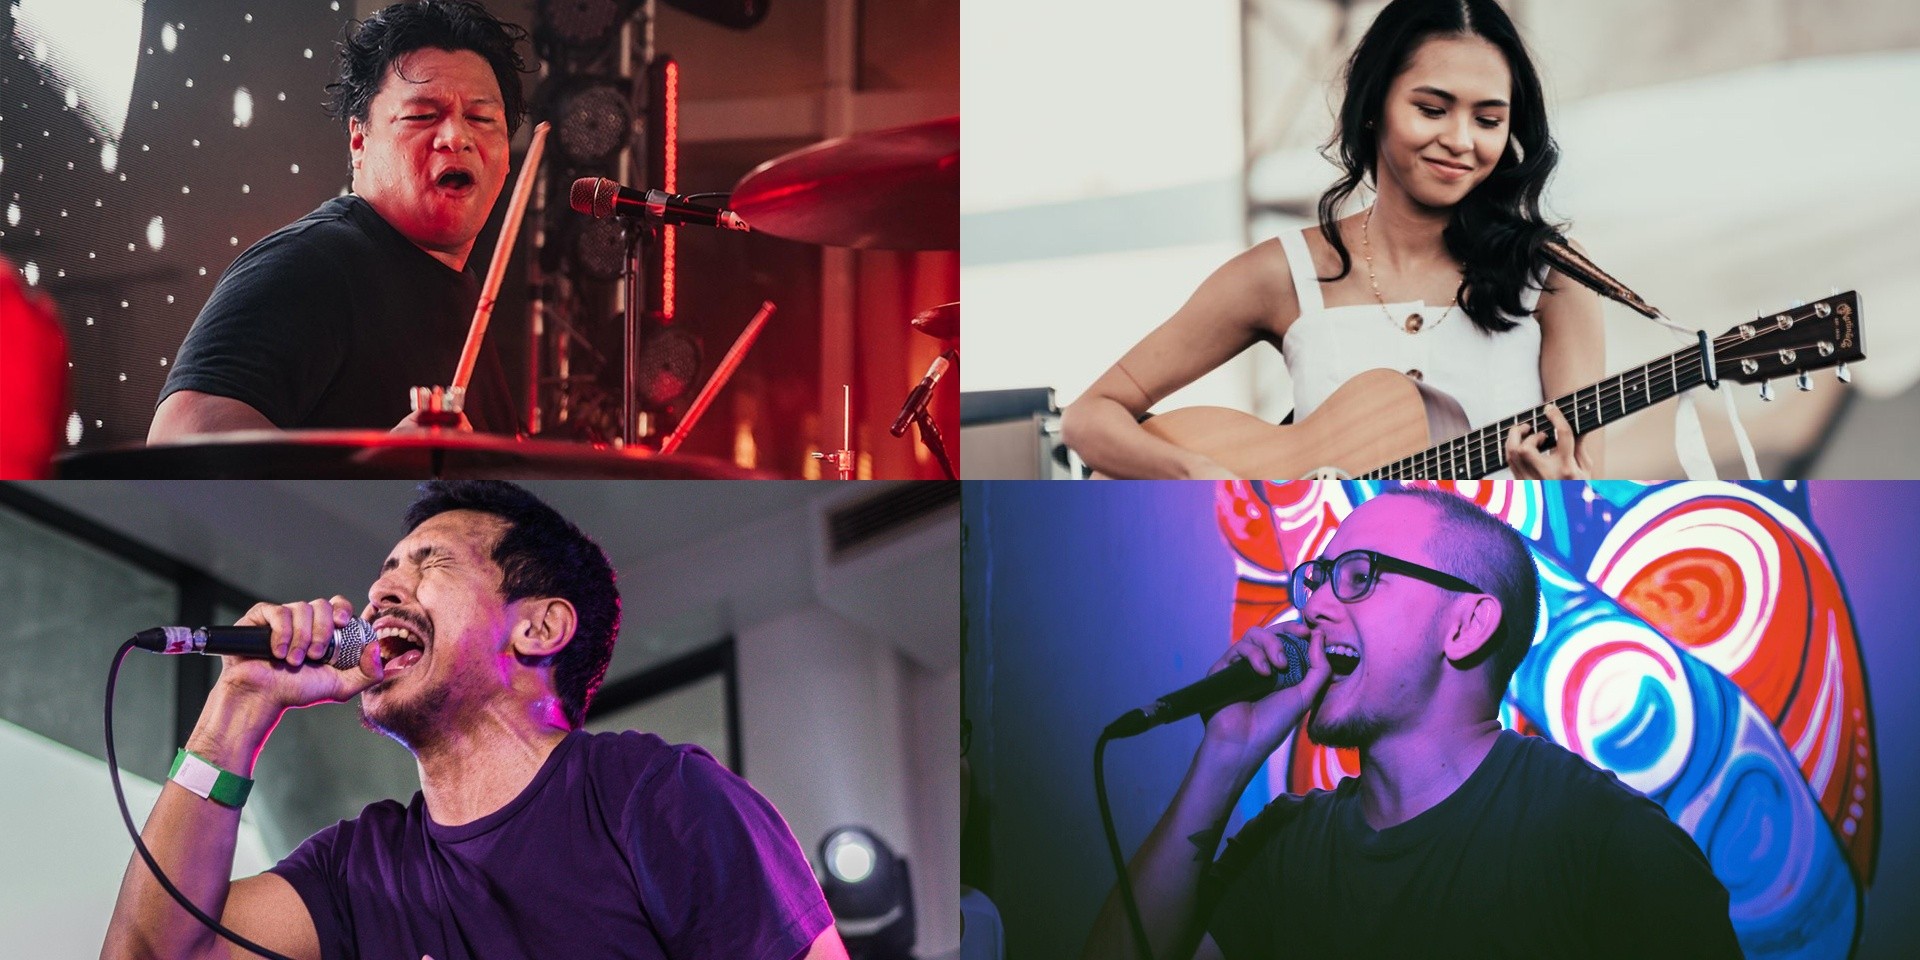 Itchyworms, Clara Benin, Dicta License, Severo, and more to perform at Red Ninja Year 10